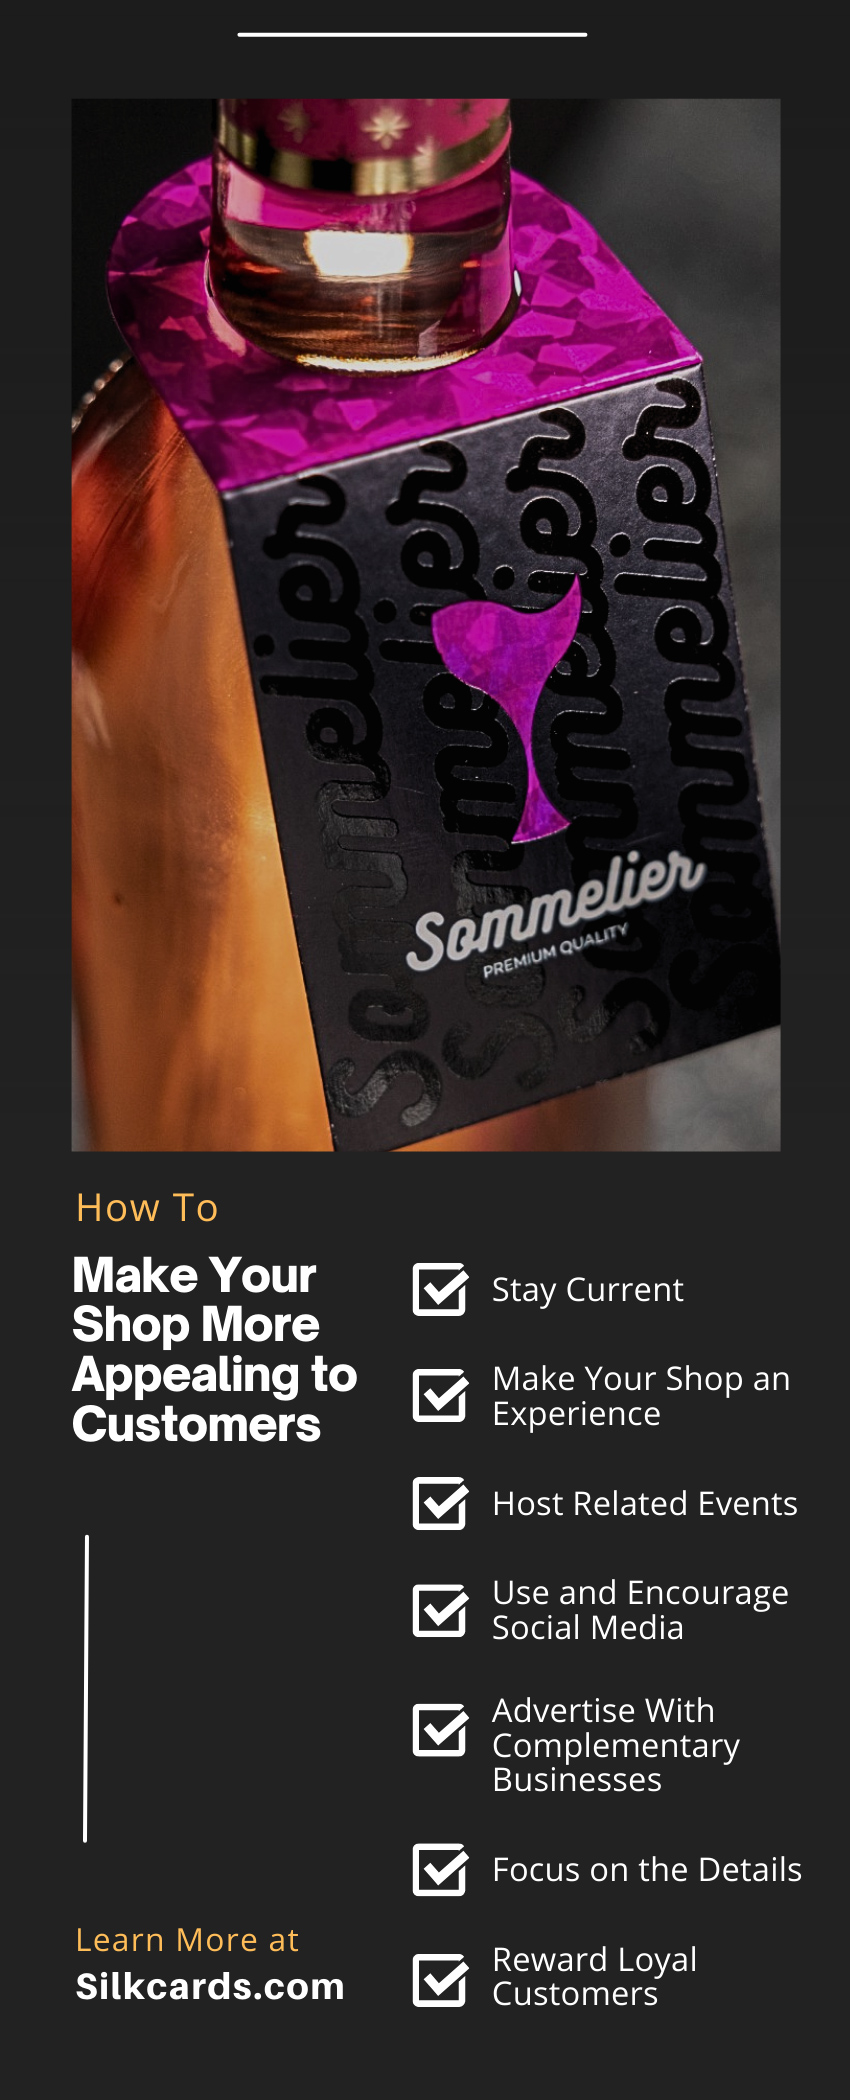 How To Make Your Shop More Appealing to Customers